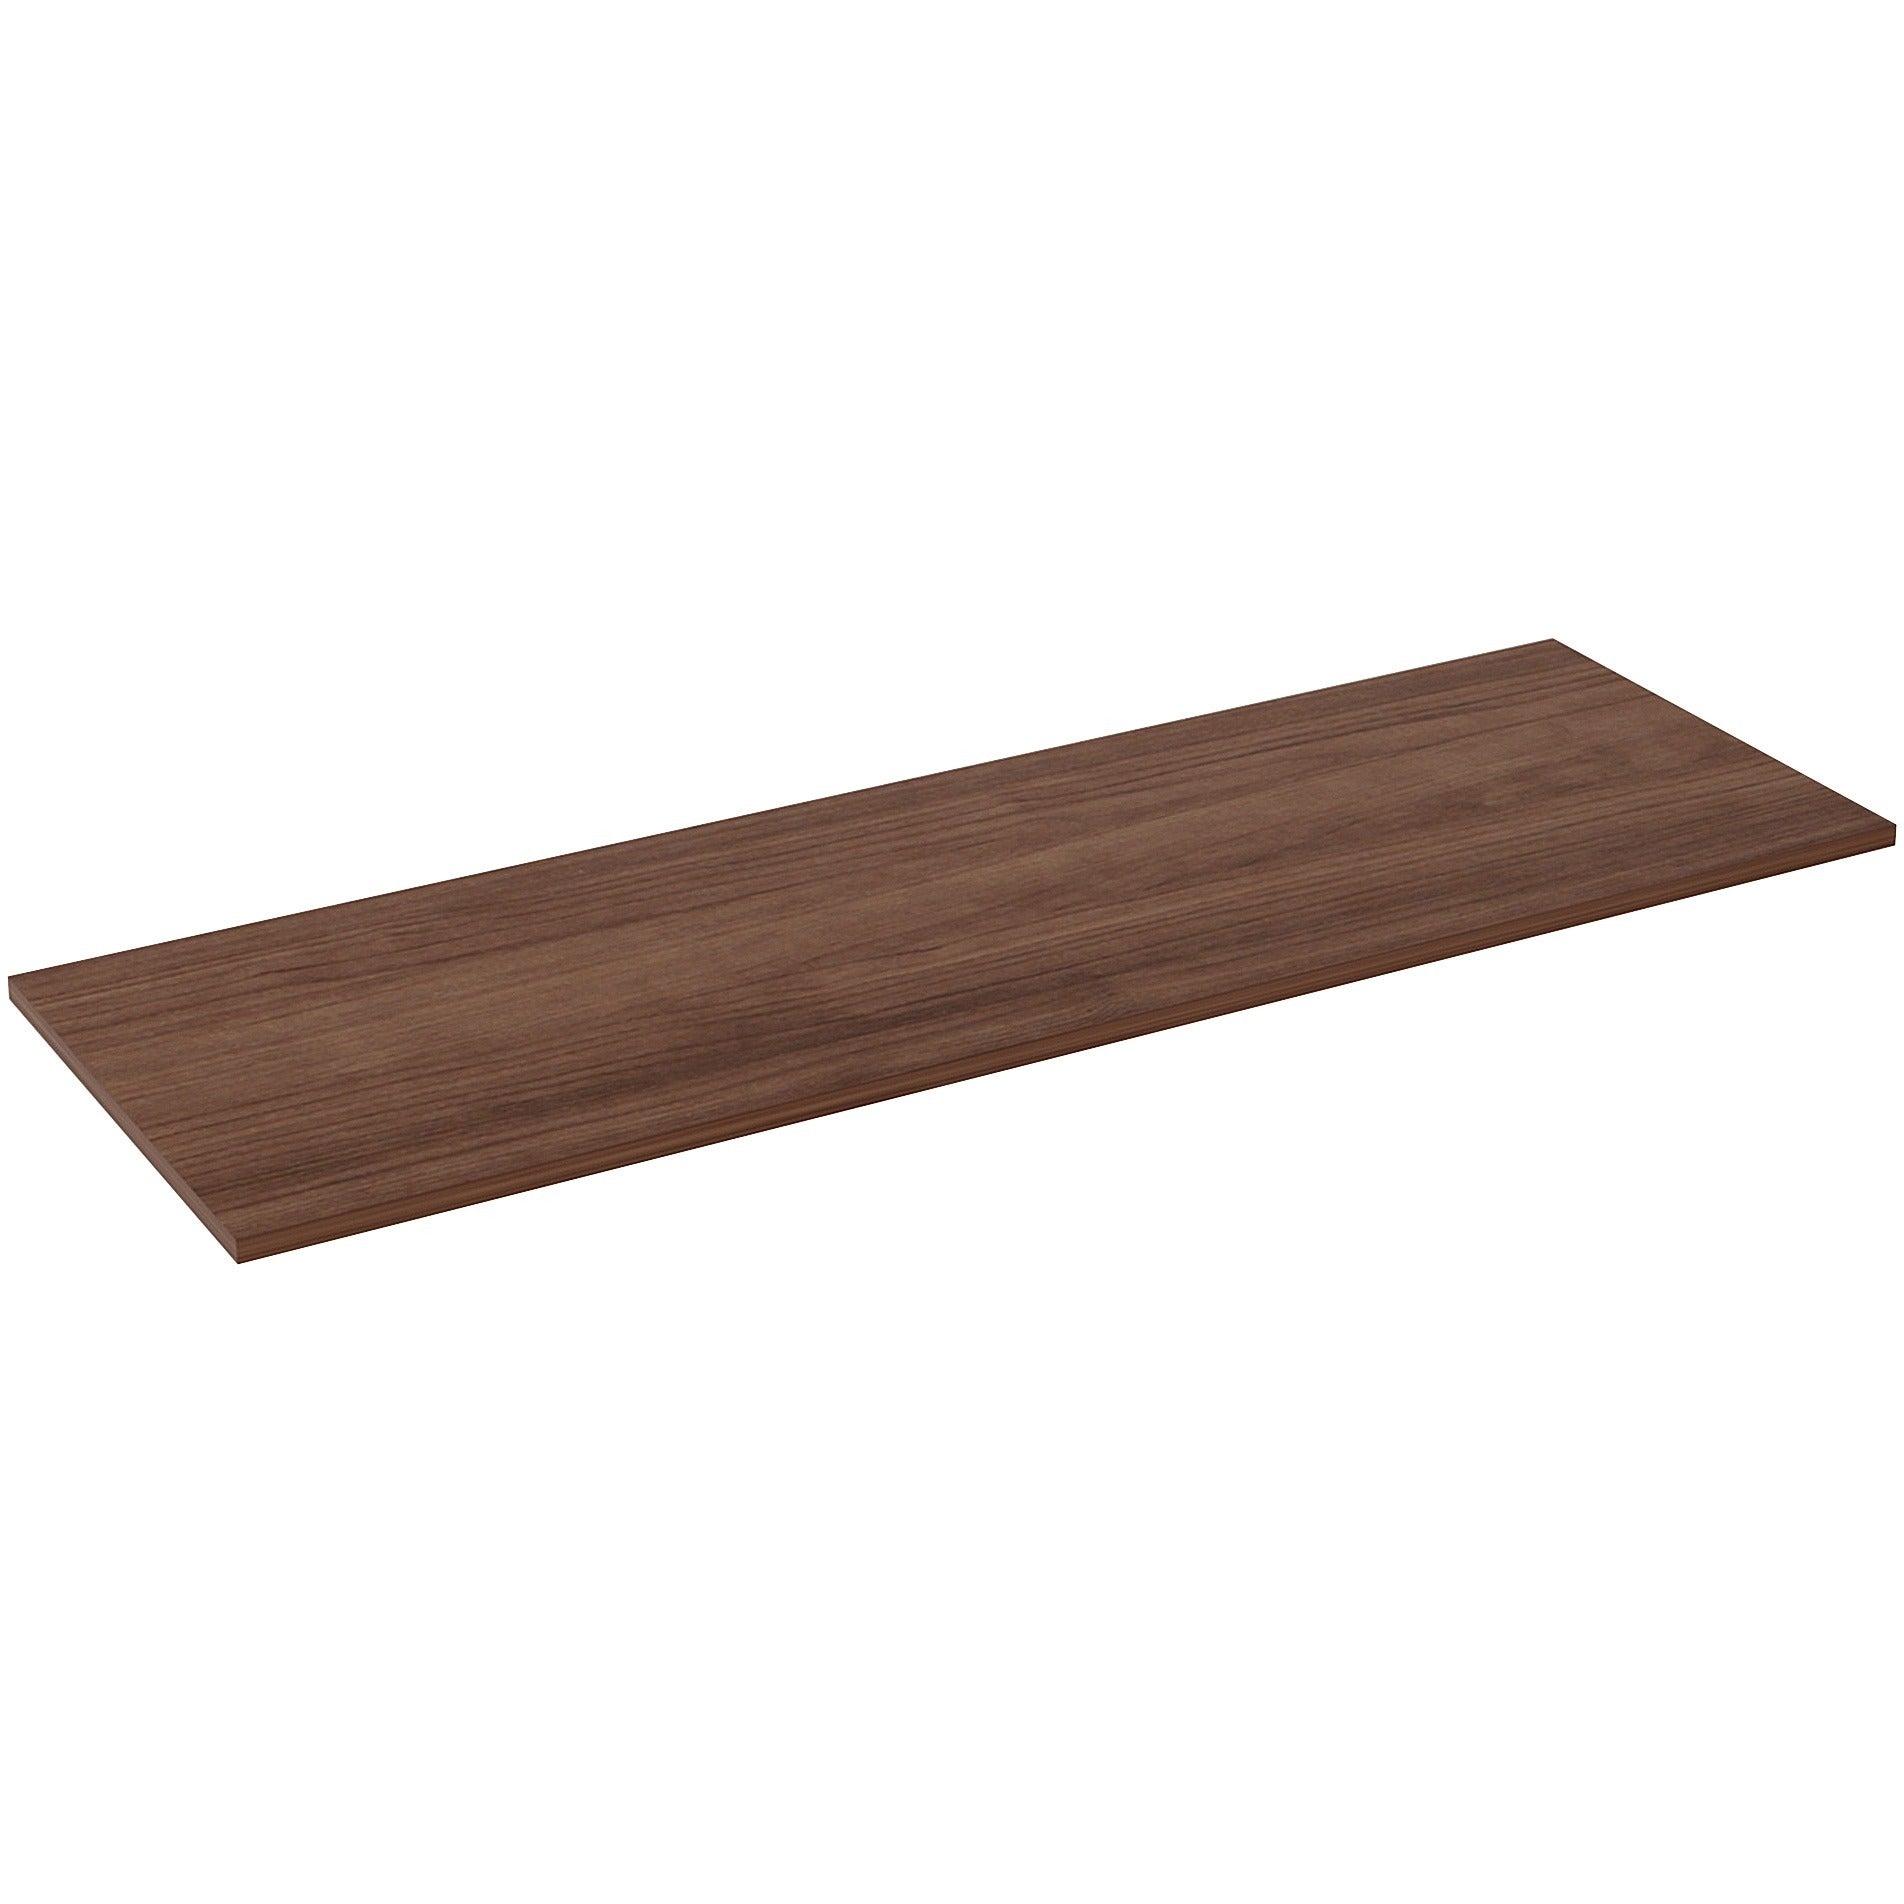 lorell-relevance-series-tabletop-for-table-topwalnut-rectangle-laminated-top-adjustable-height-x-24-table-top-width-x-72-table-top-depth-x-1-table-top-thickness-assembly-required-1-each_llr59632 - 3